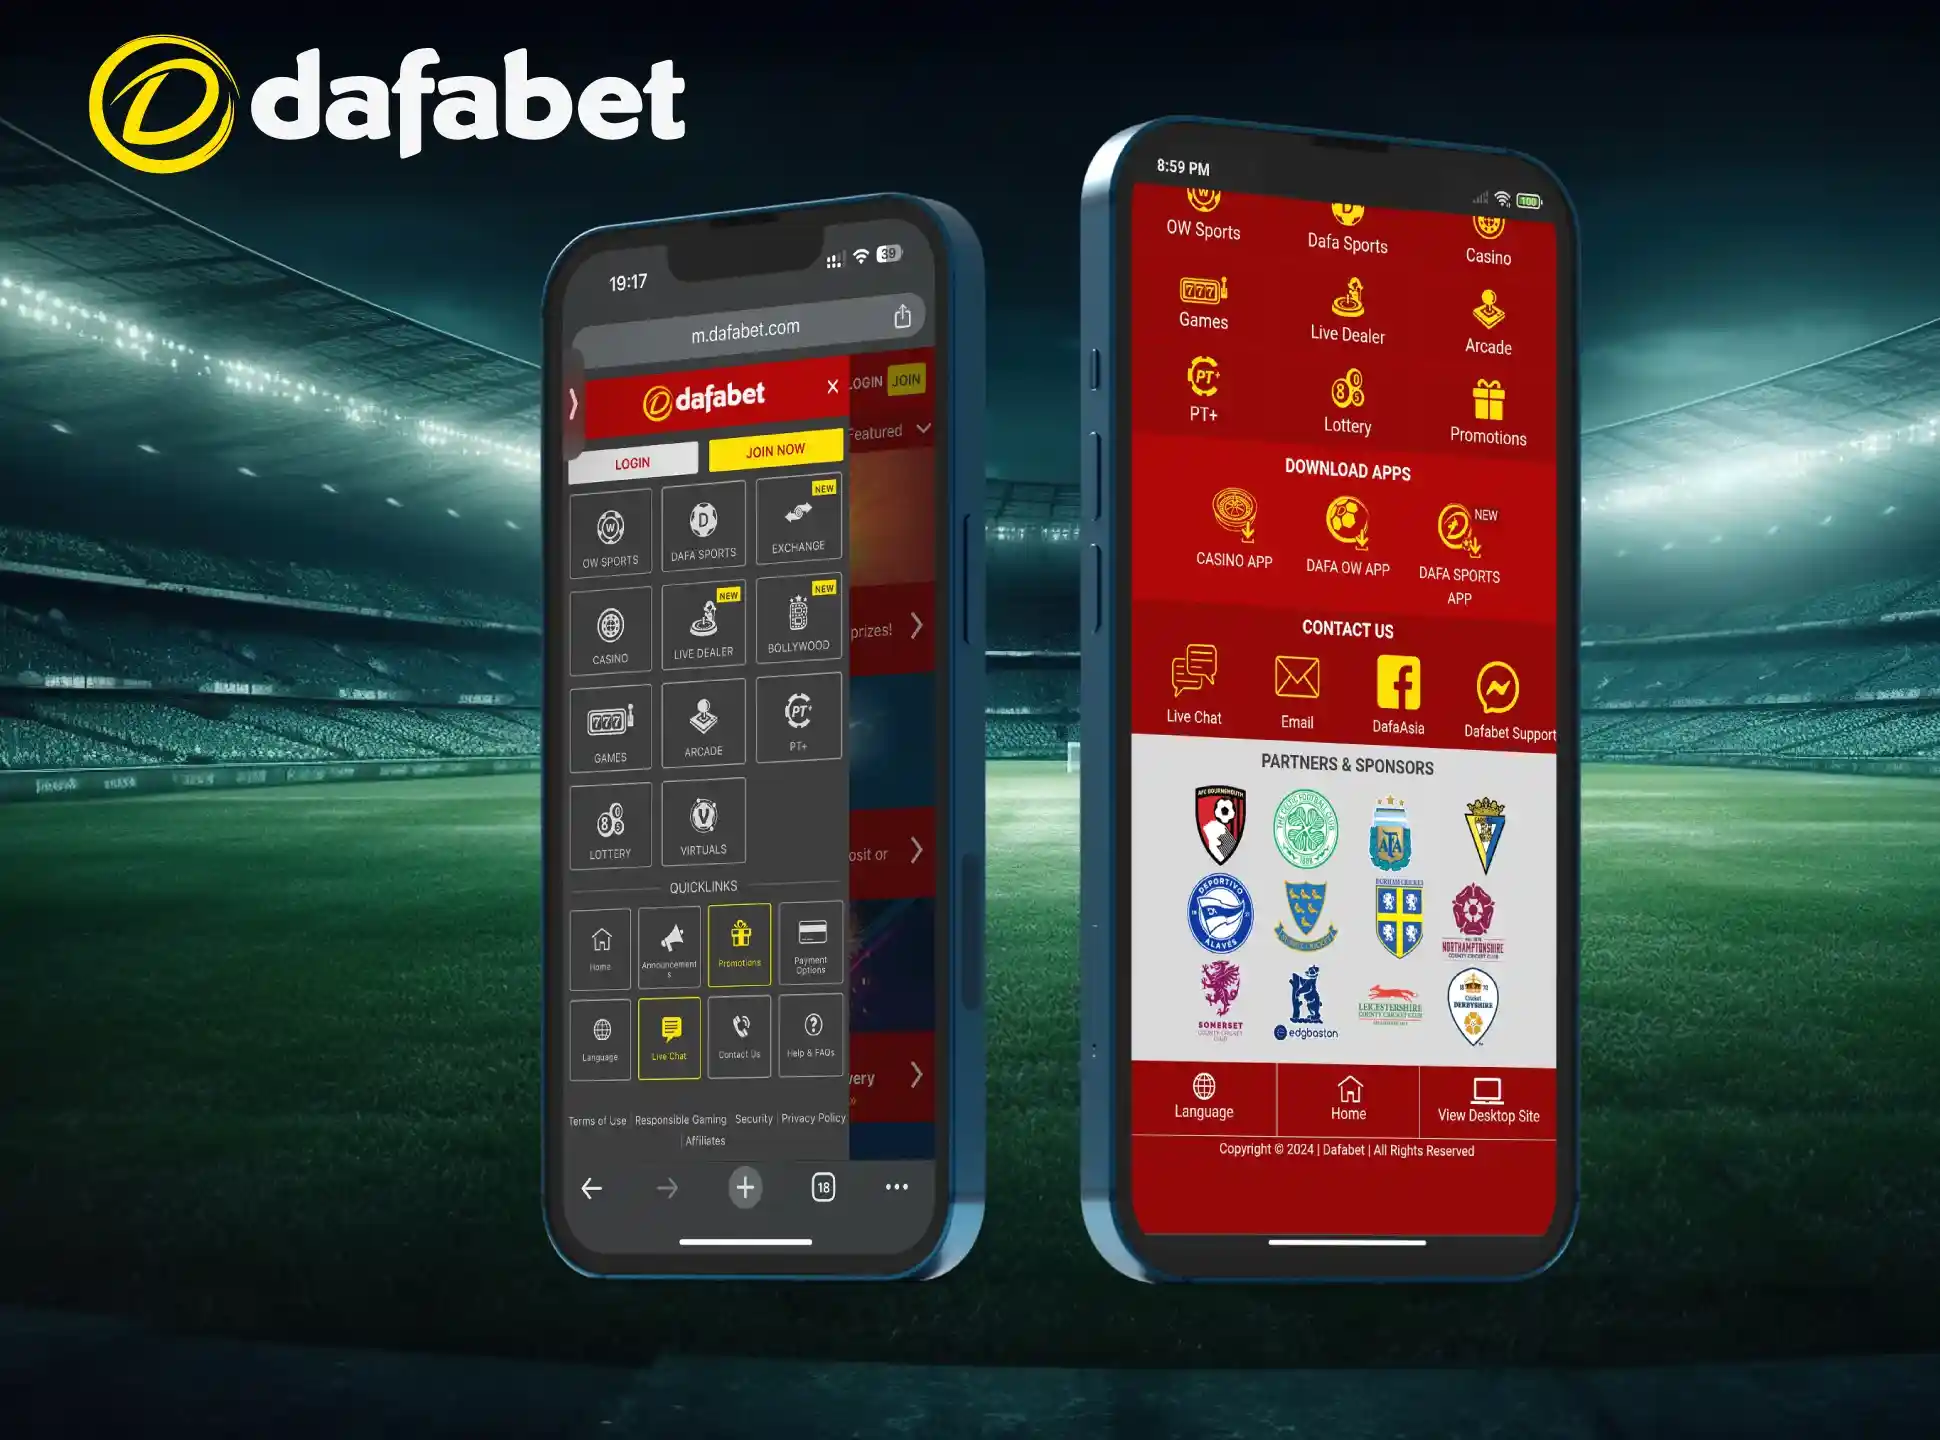 The main features and useful functions of the Dafabet app.